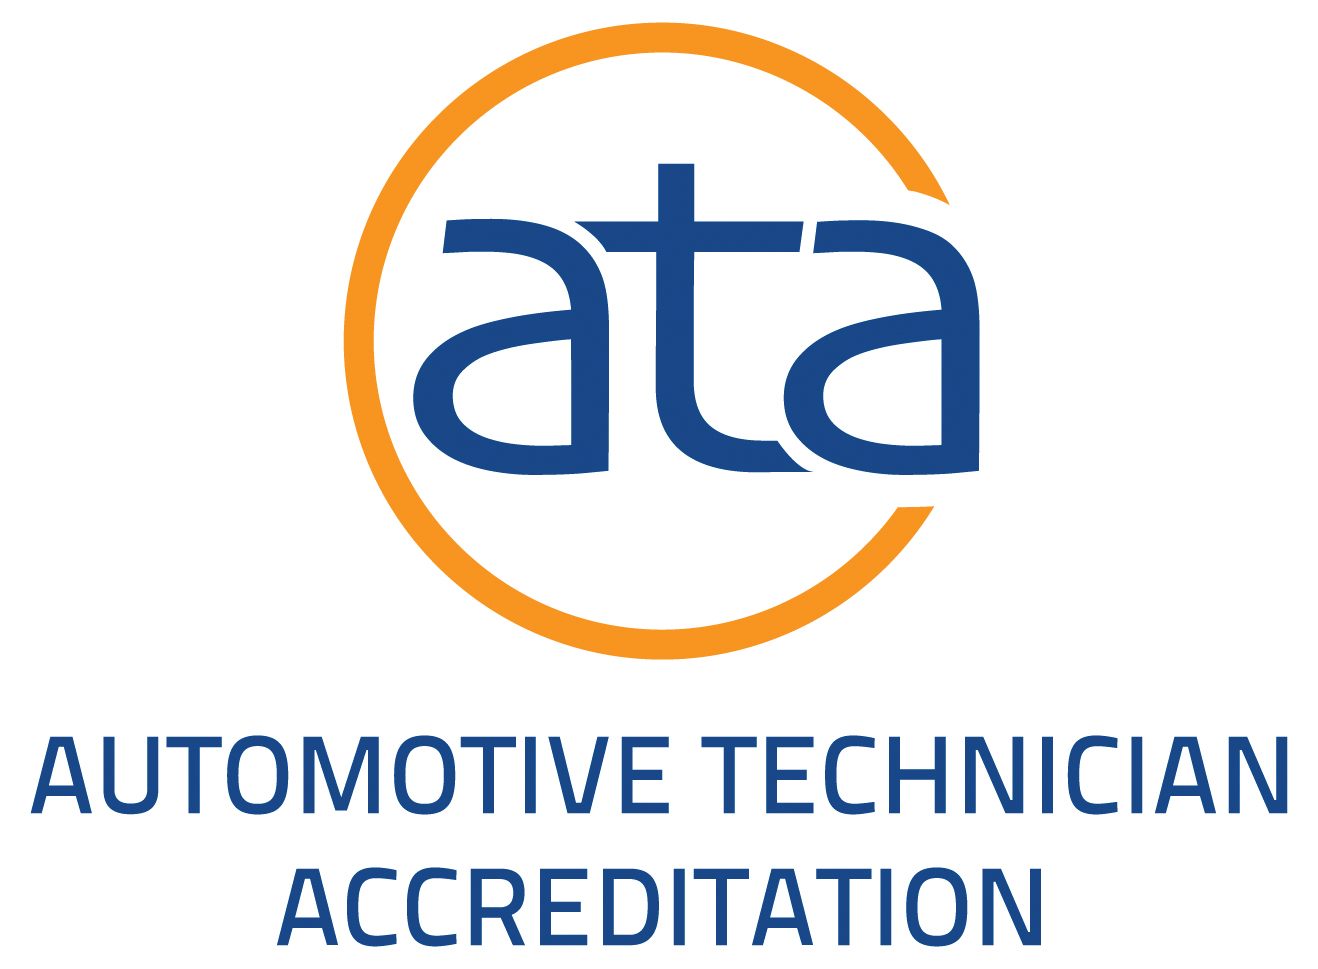 RPM Welding News: RPM NOW OFFERING ONSITE ATA AOM PANEL ACCREDITION